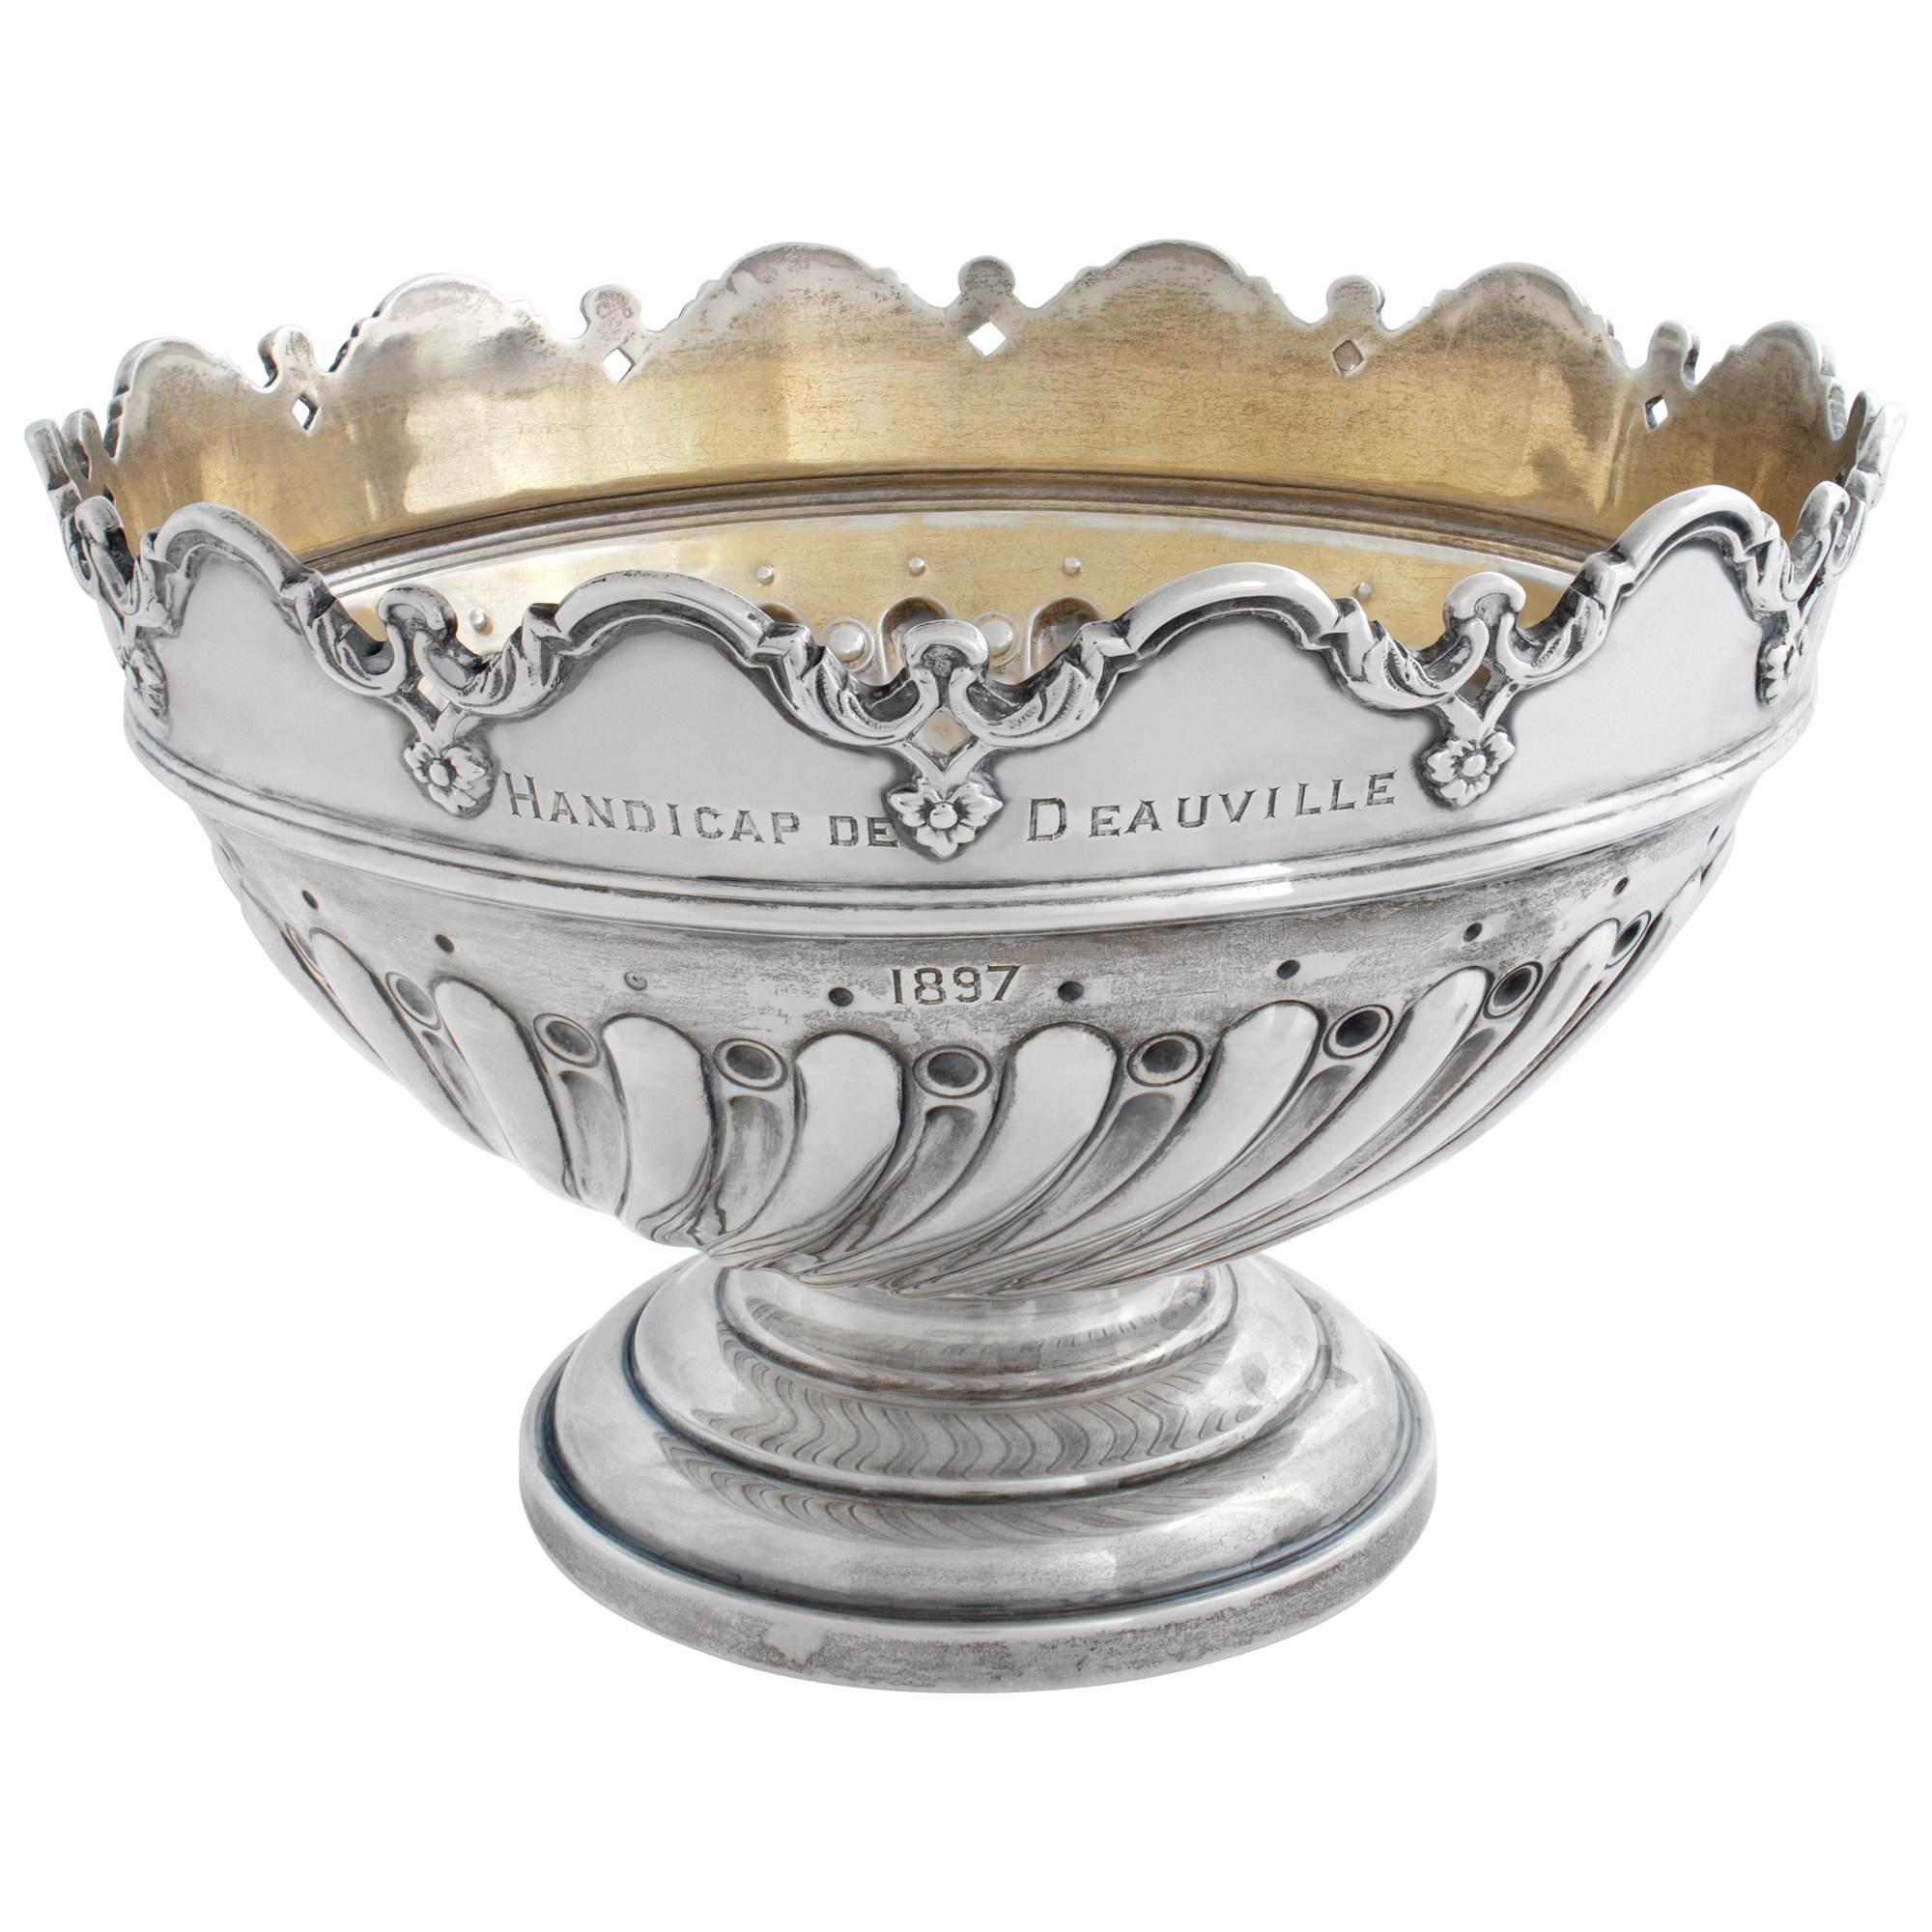 English London Sterling Silver Trophy, 1897. hand engraved "HANDICAP DE DEAUVILLE - 1897", over 12.37 ounce troy of .925 sertling silver